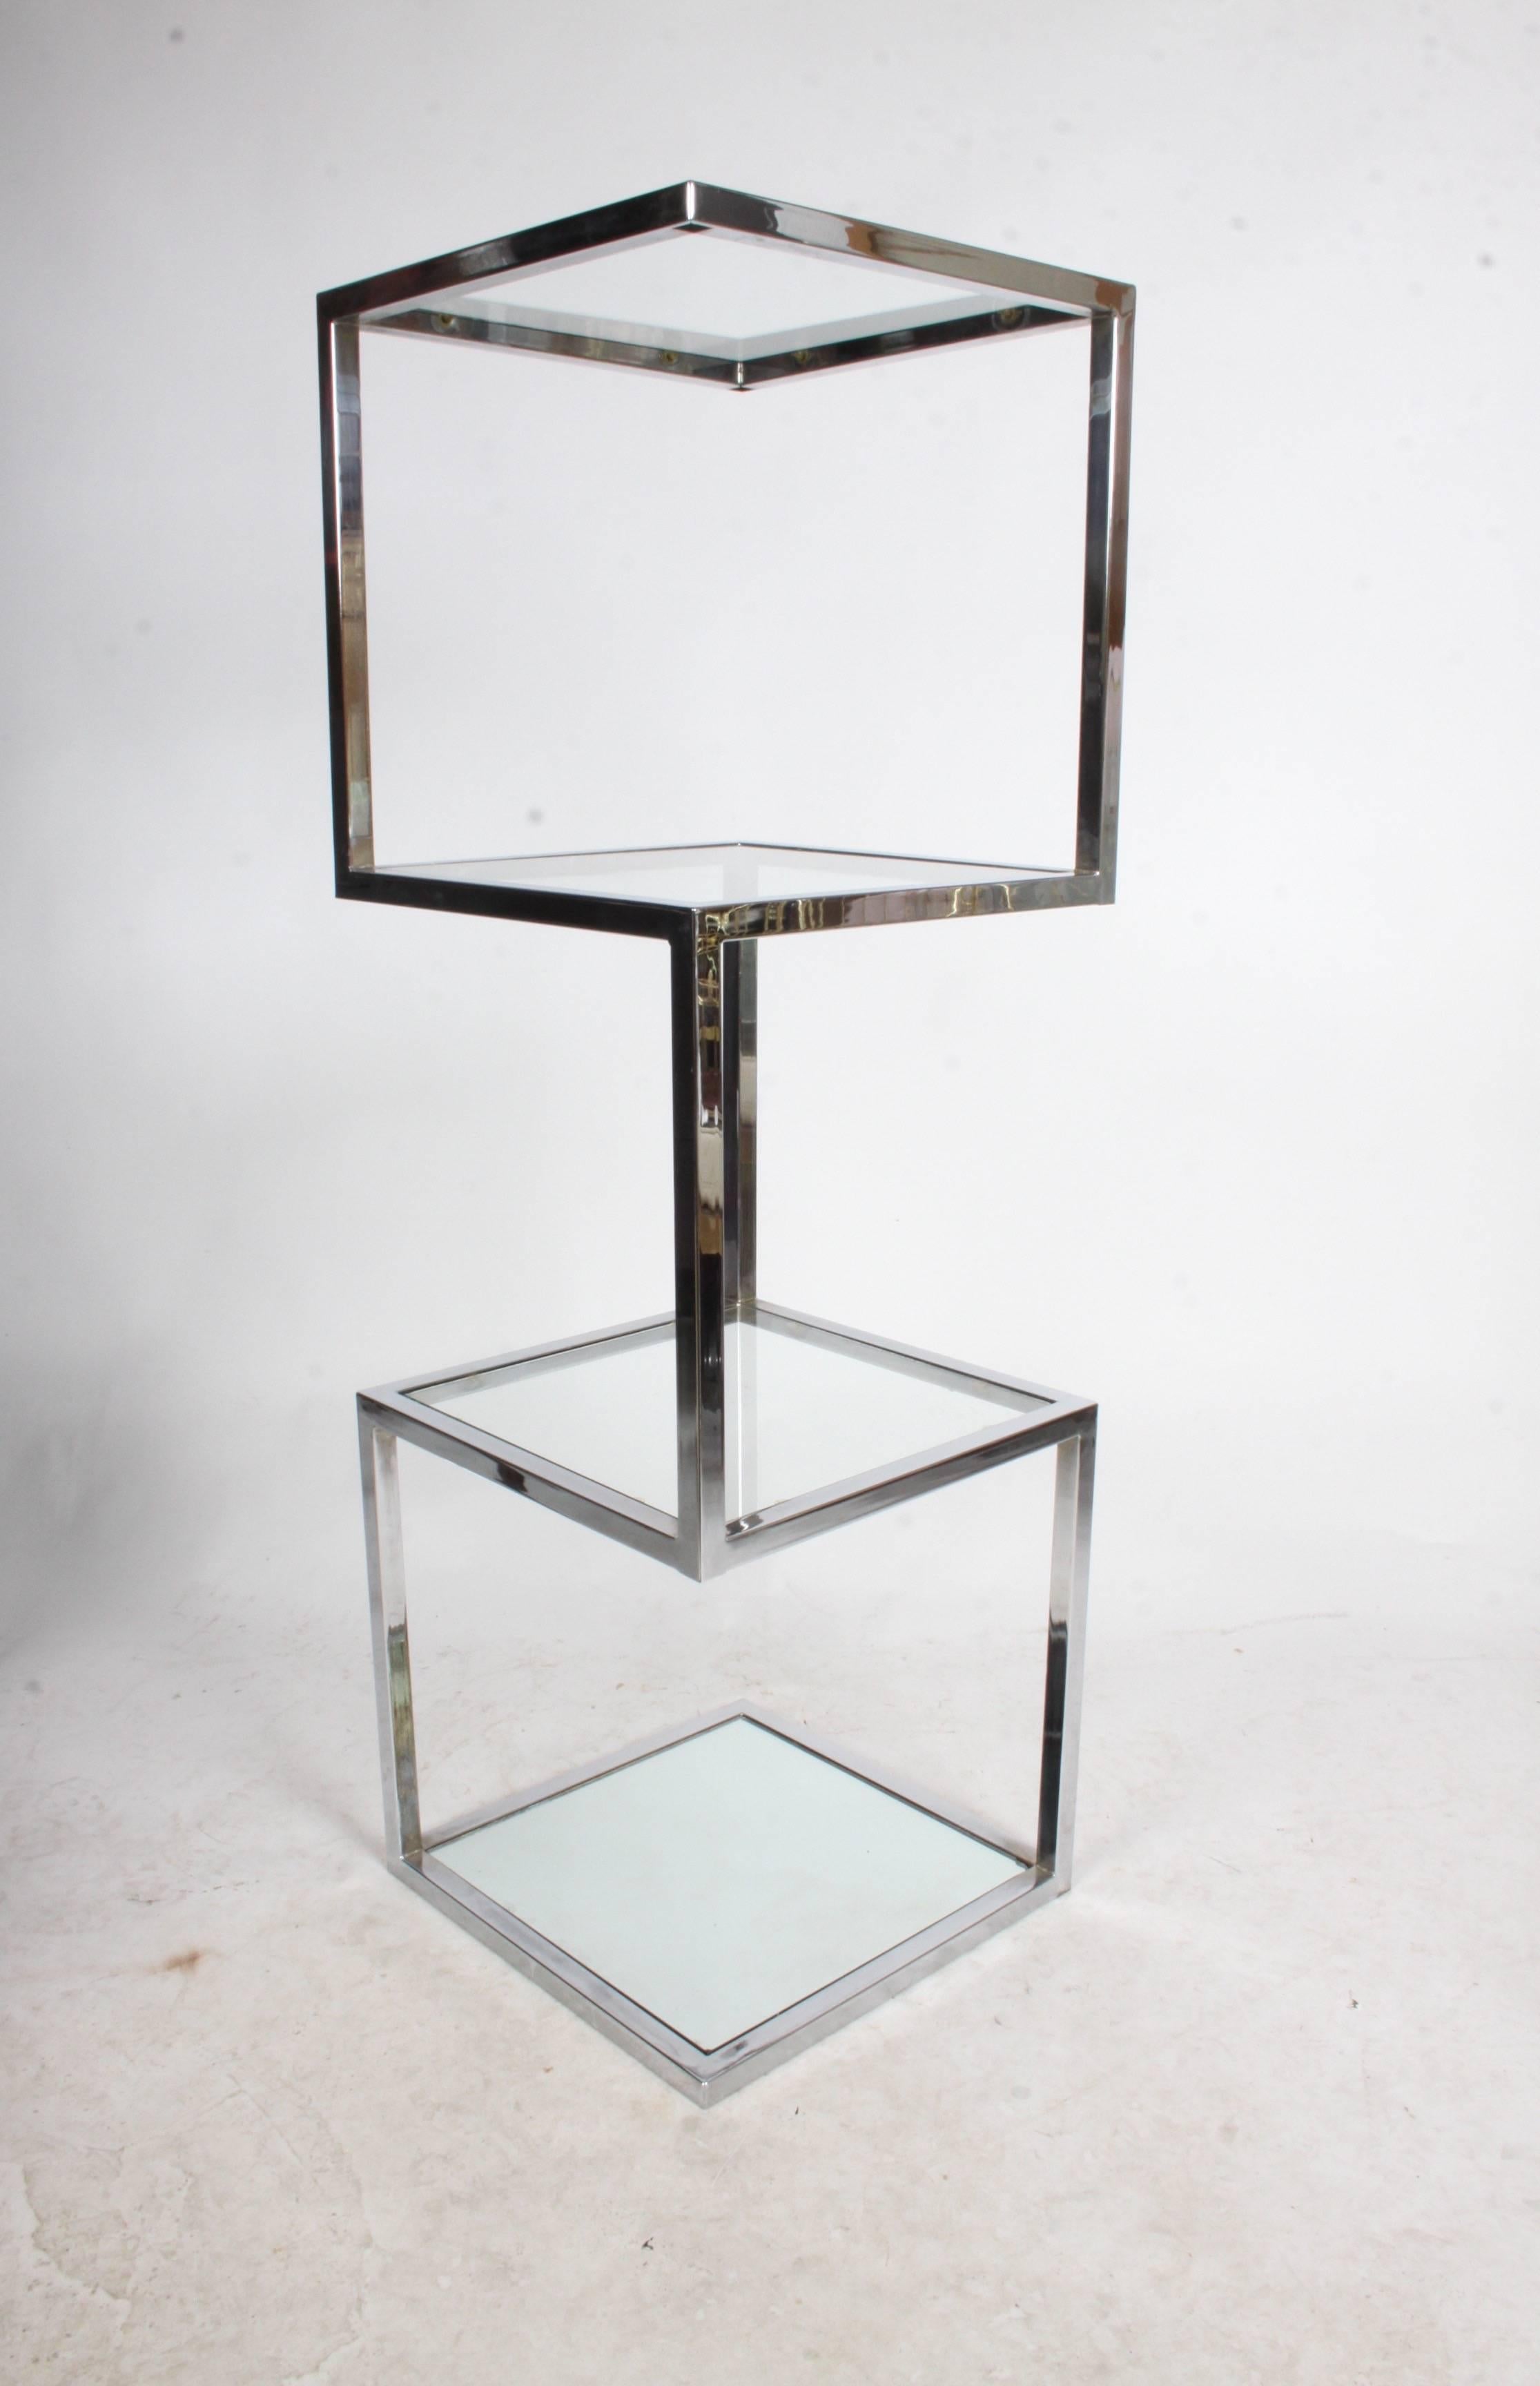  Milo Baughman chrome and glass sculptural tower etagere.  Stacked cubed display has 4 display surfaces, with 17